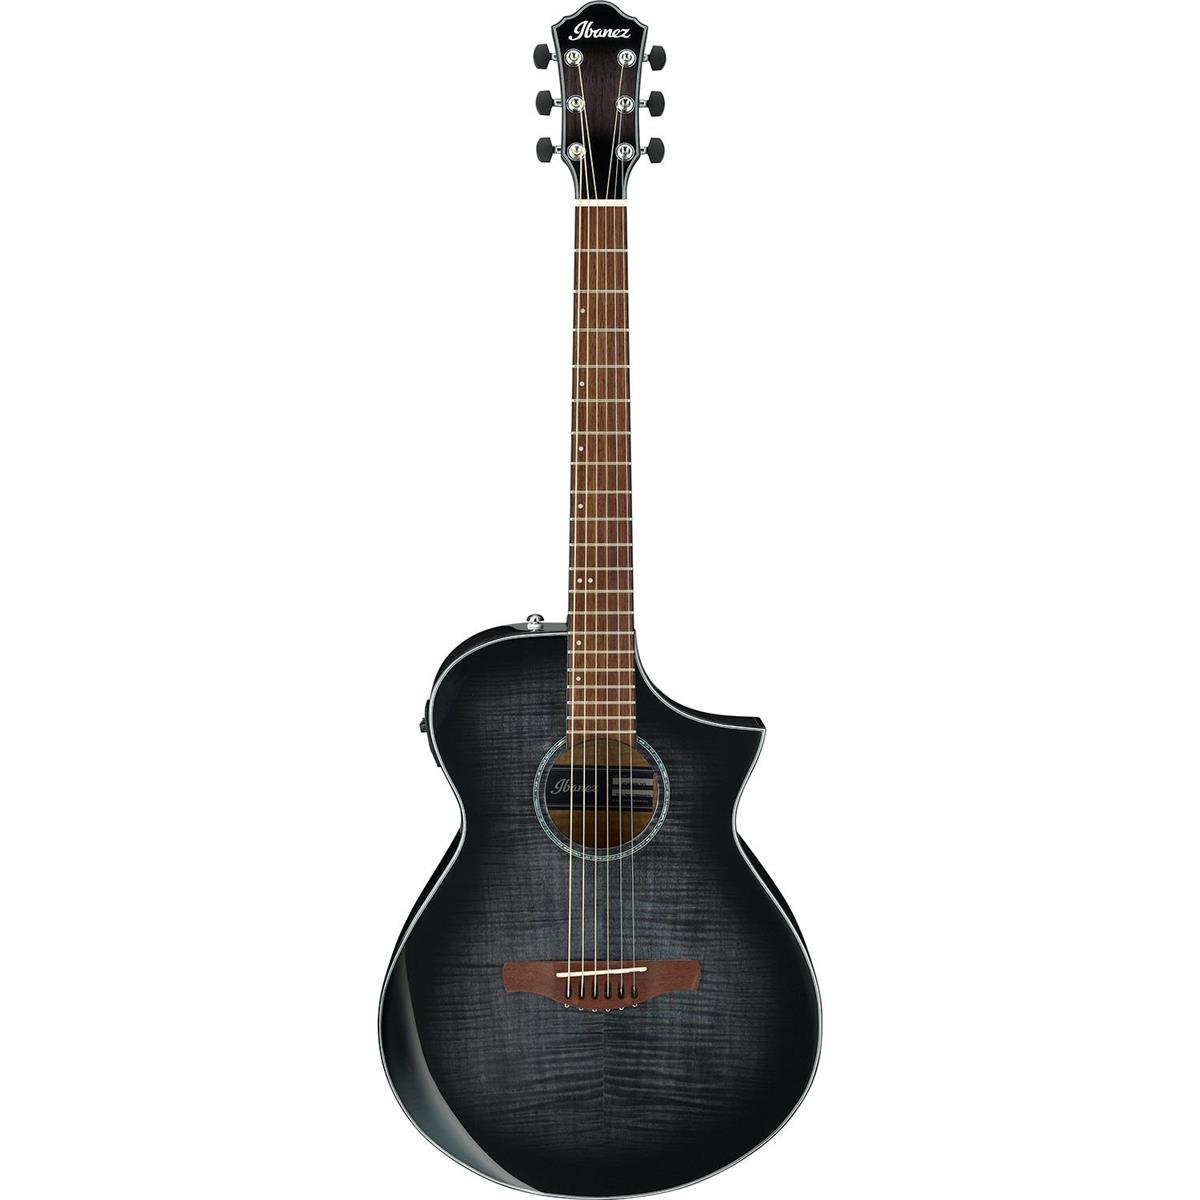 Image of Ibanez AEWC400 Acoustic Electric Guitar